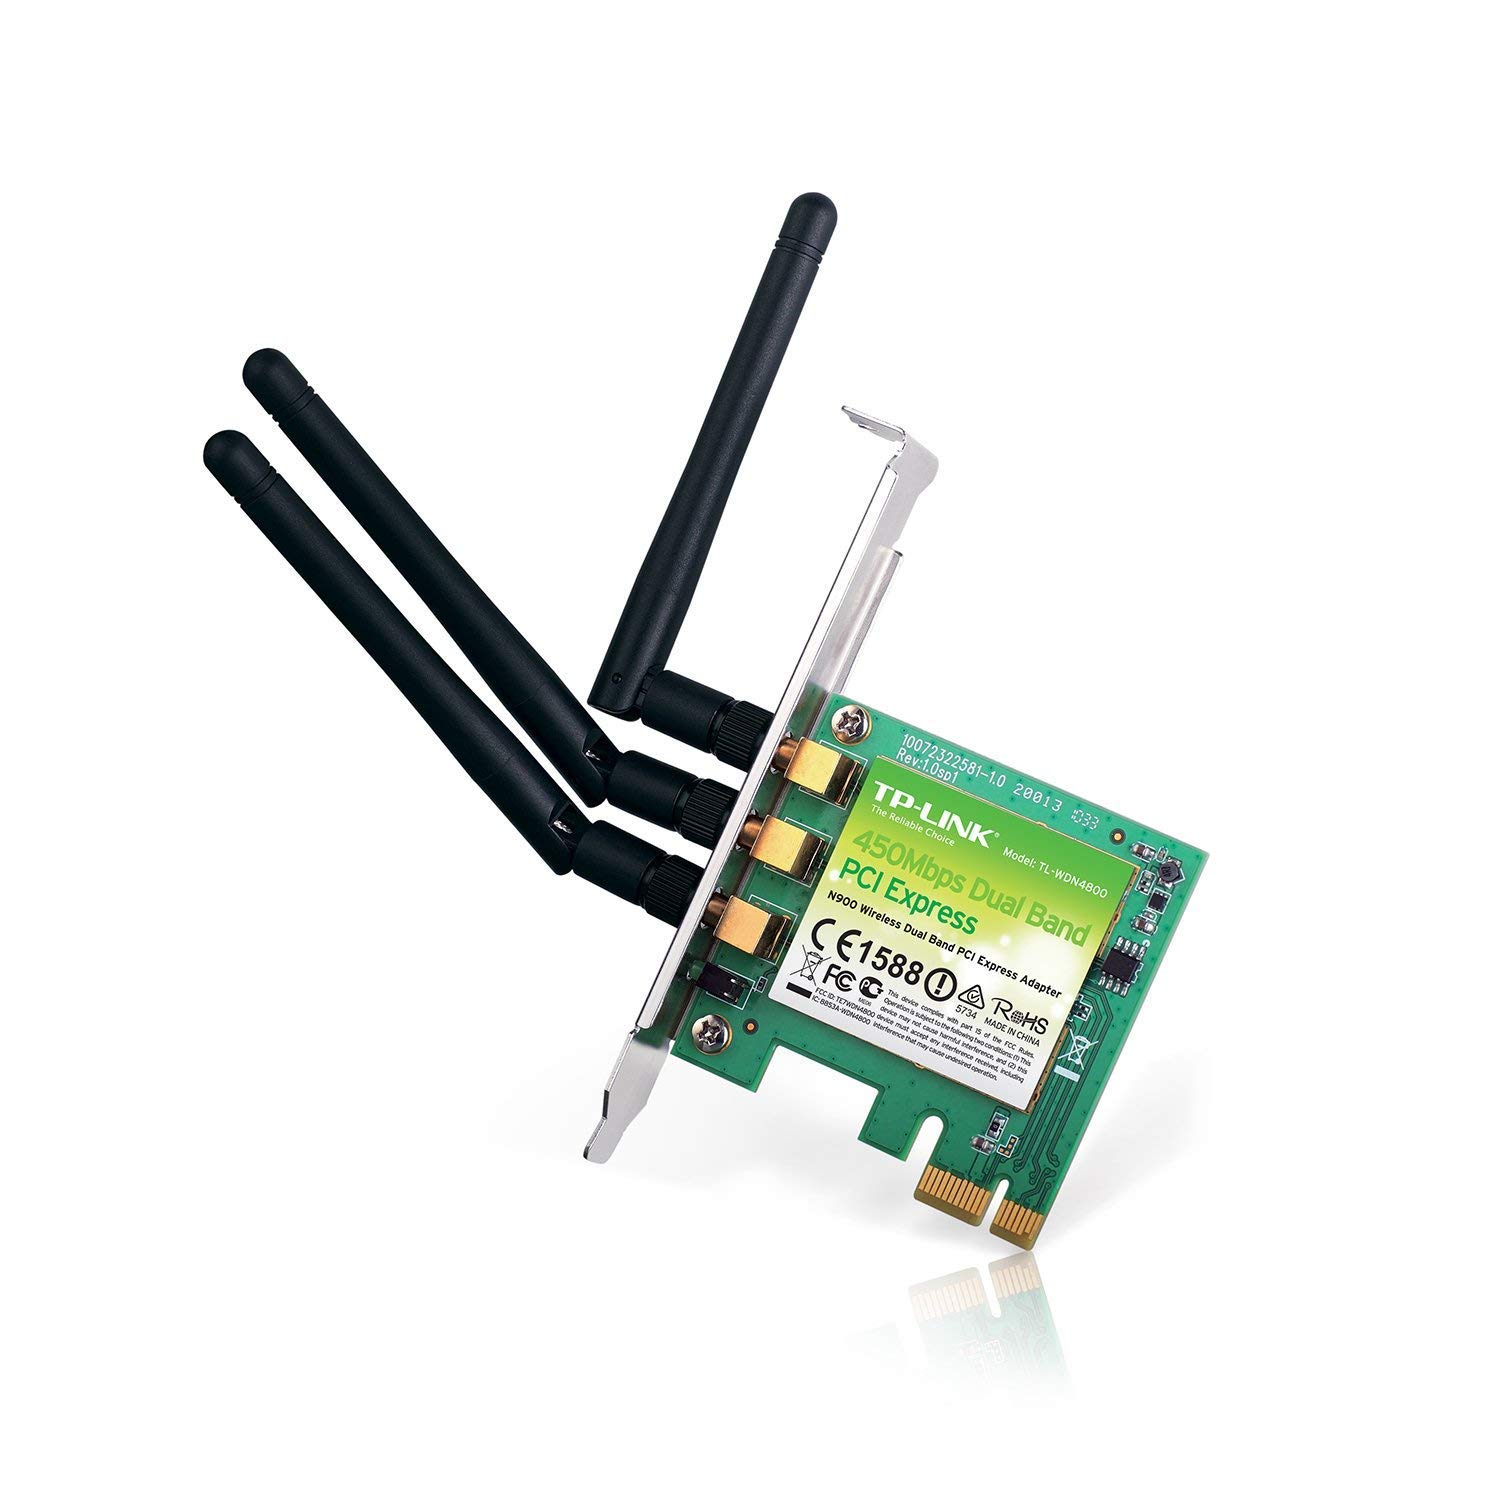 Download the driver from the TP-Link website or use the installation CD that comes with the device.
Plug in the TP-Link TL-WDN4800 wireless adapter to an available USB port on your computer.